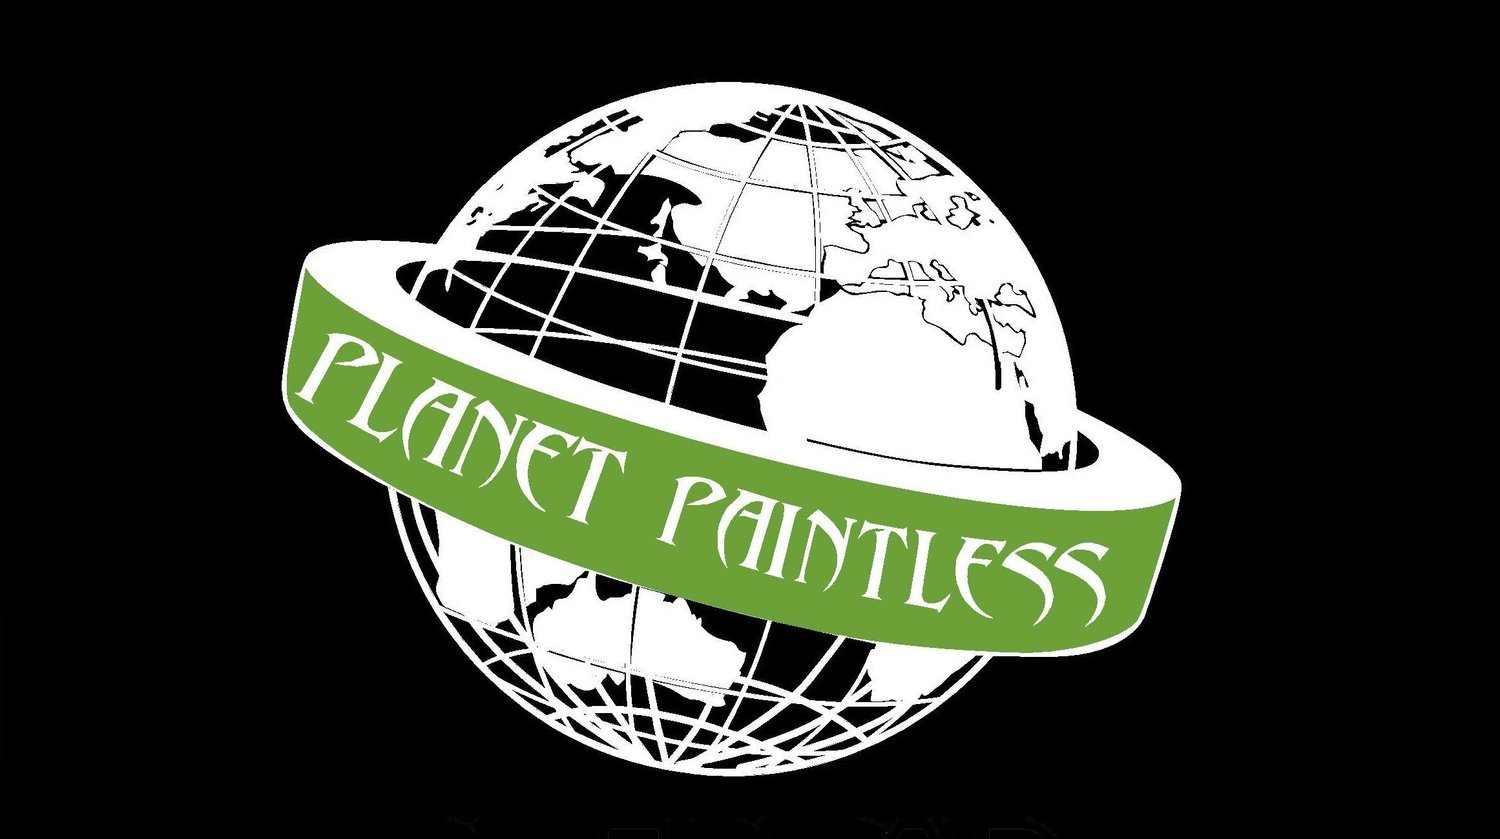 Planet Paintless